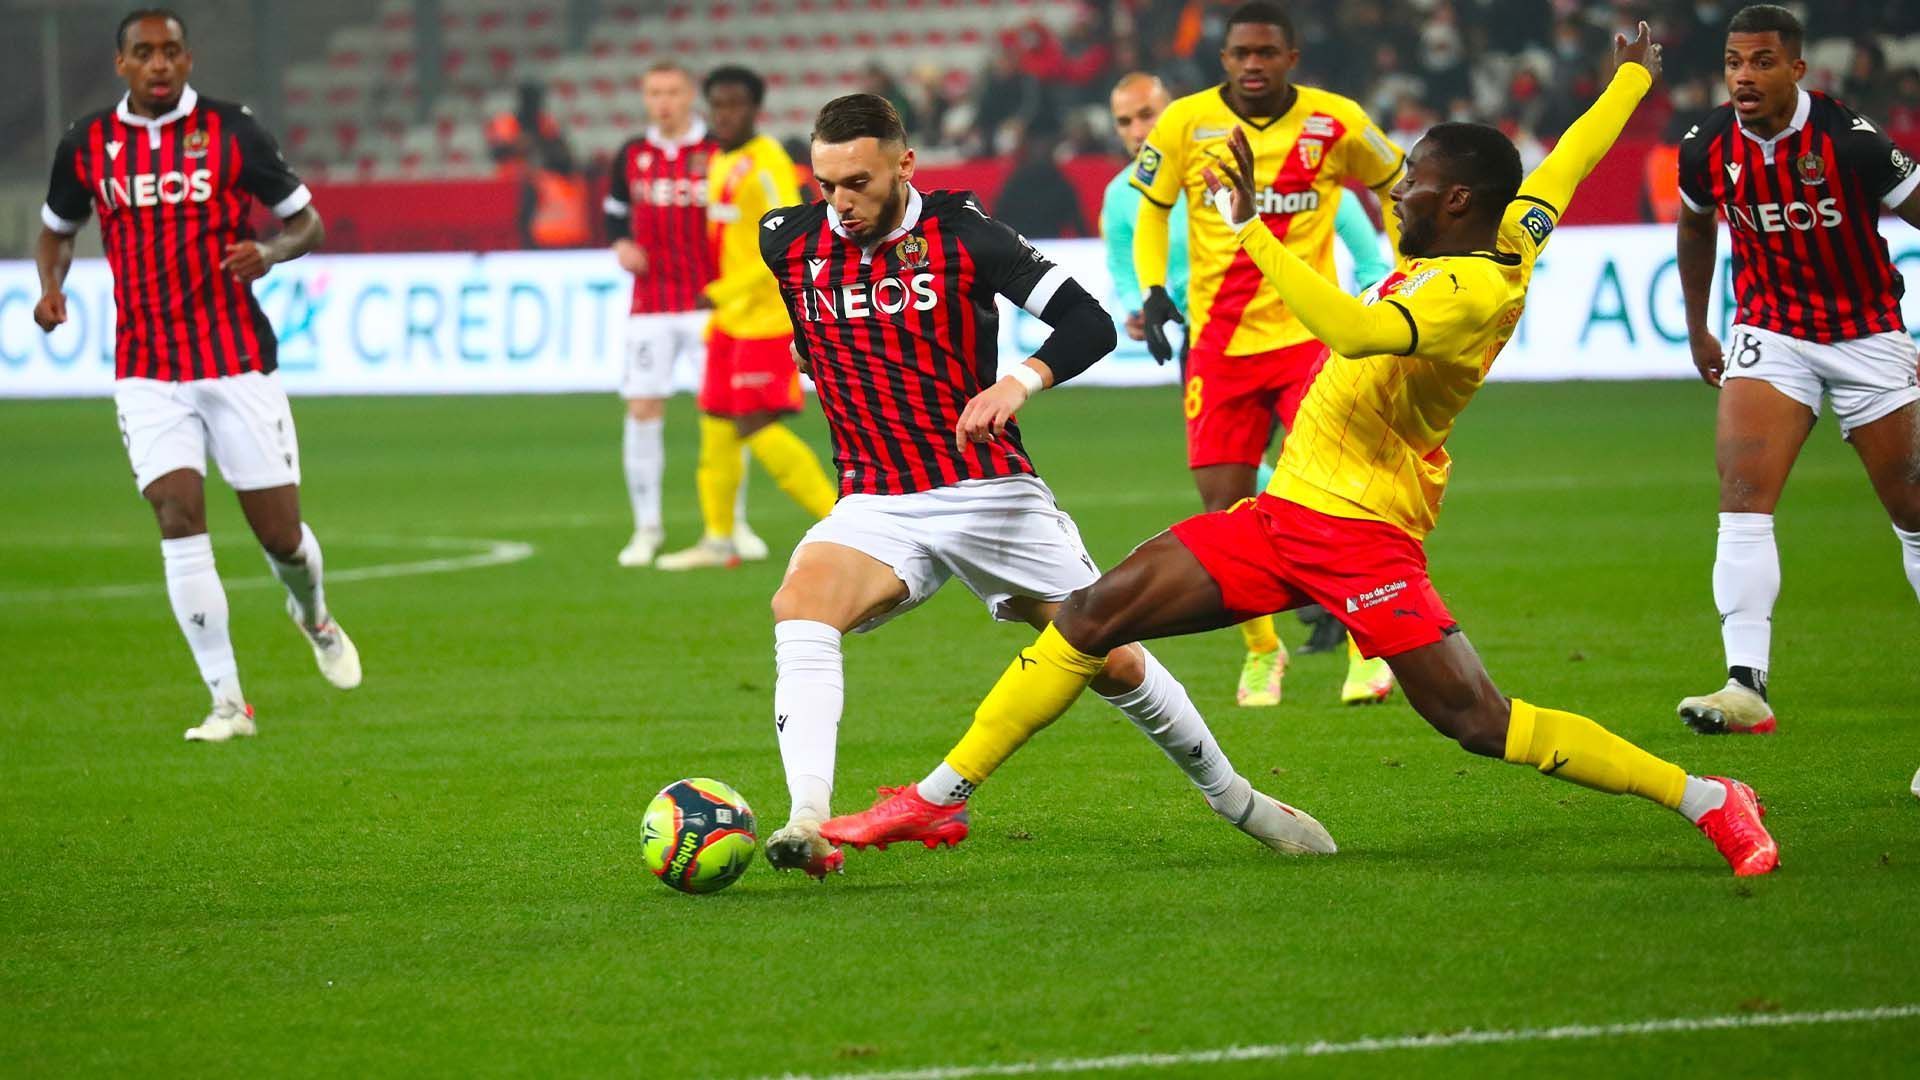 Nice and Lens square off in the Ligue 1 on Wednesday